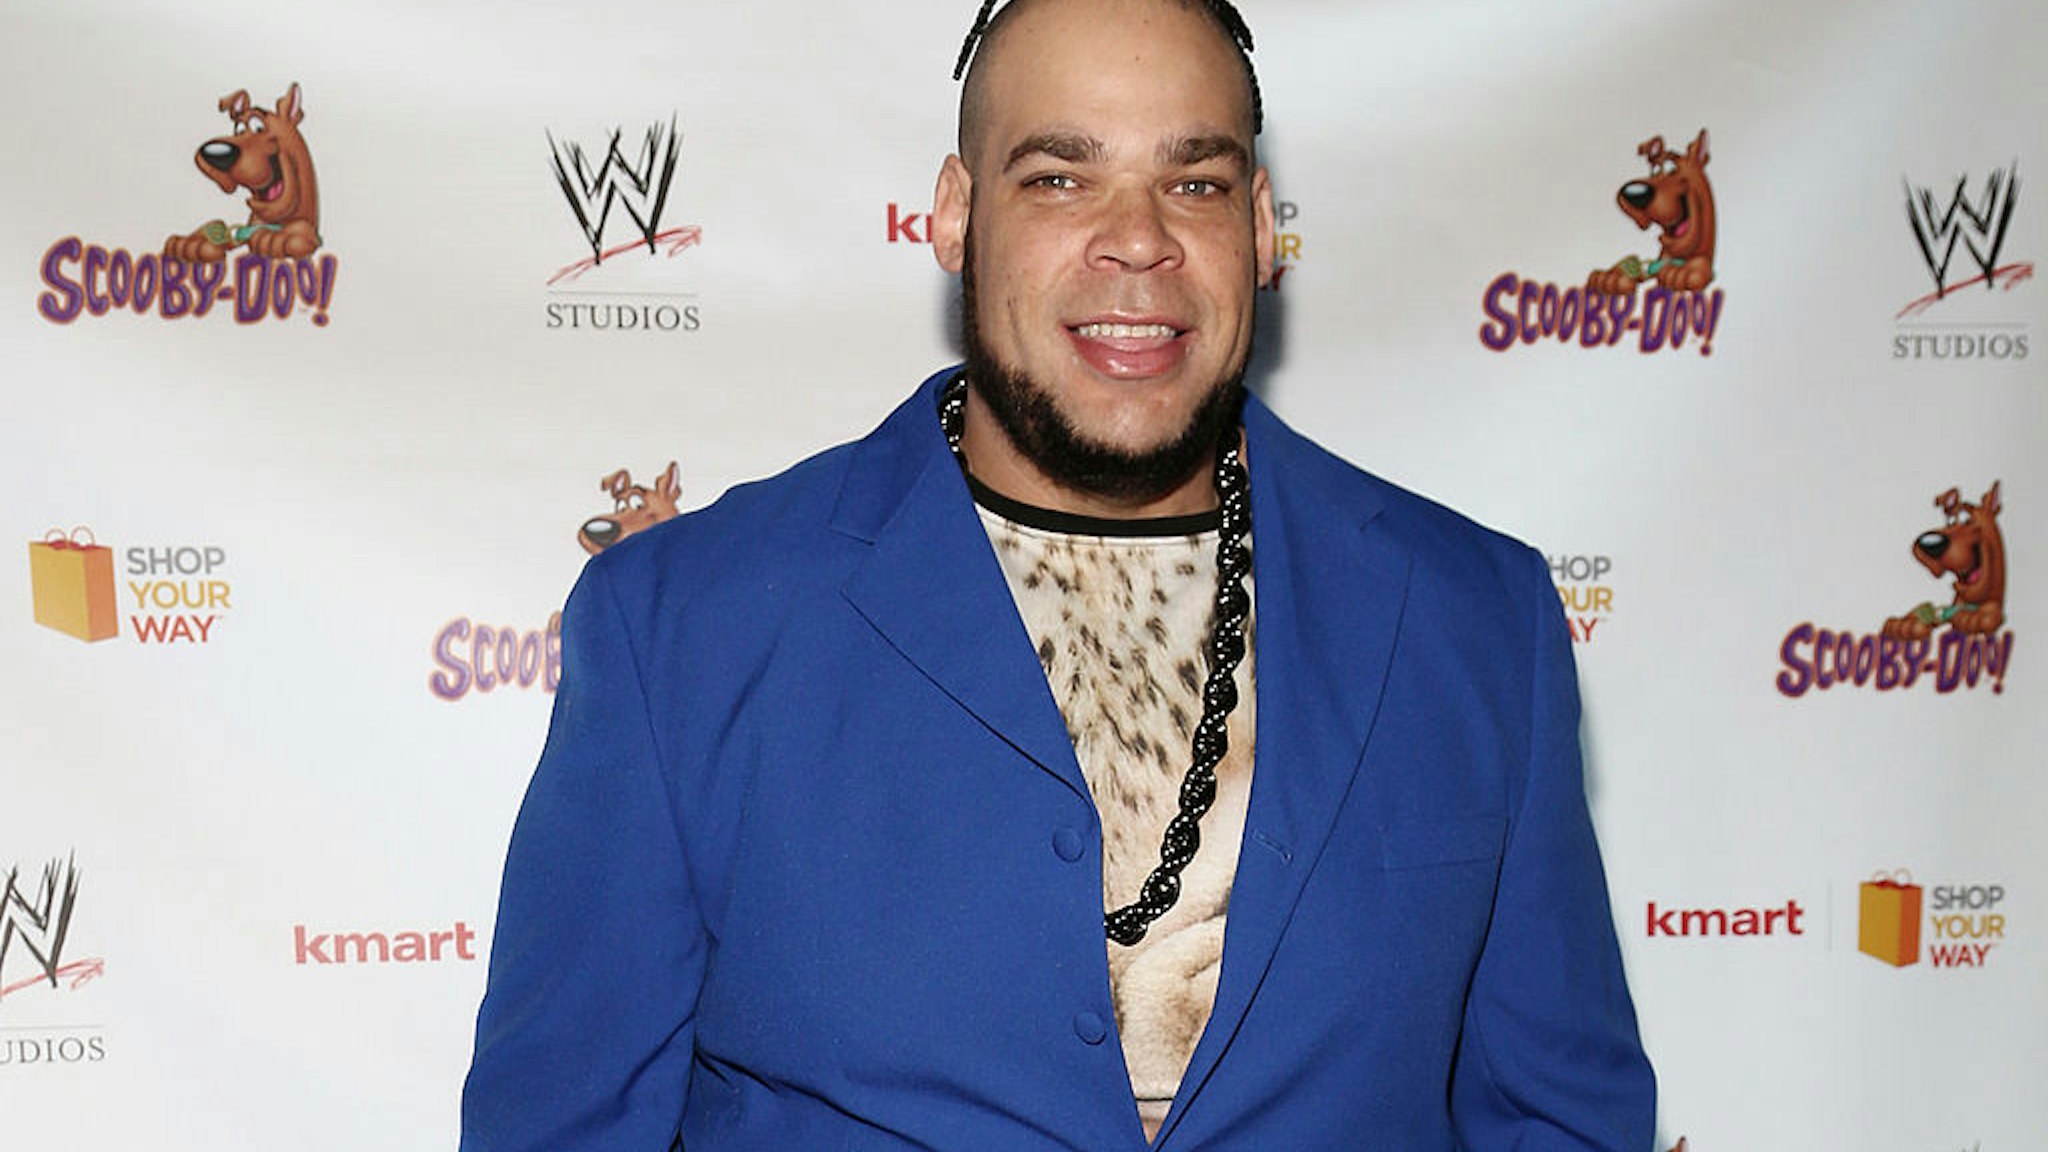 NEW YORK, NY - MARCH 22: WWE wrestler Brodus Clay attends the "Scooby Doo! WrestleMania Mystery" New York Premiere at Tribeca Cinemas on March 22, 2014 in New York City. (Photo by Paul Zimmerman/WireImage)